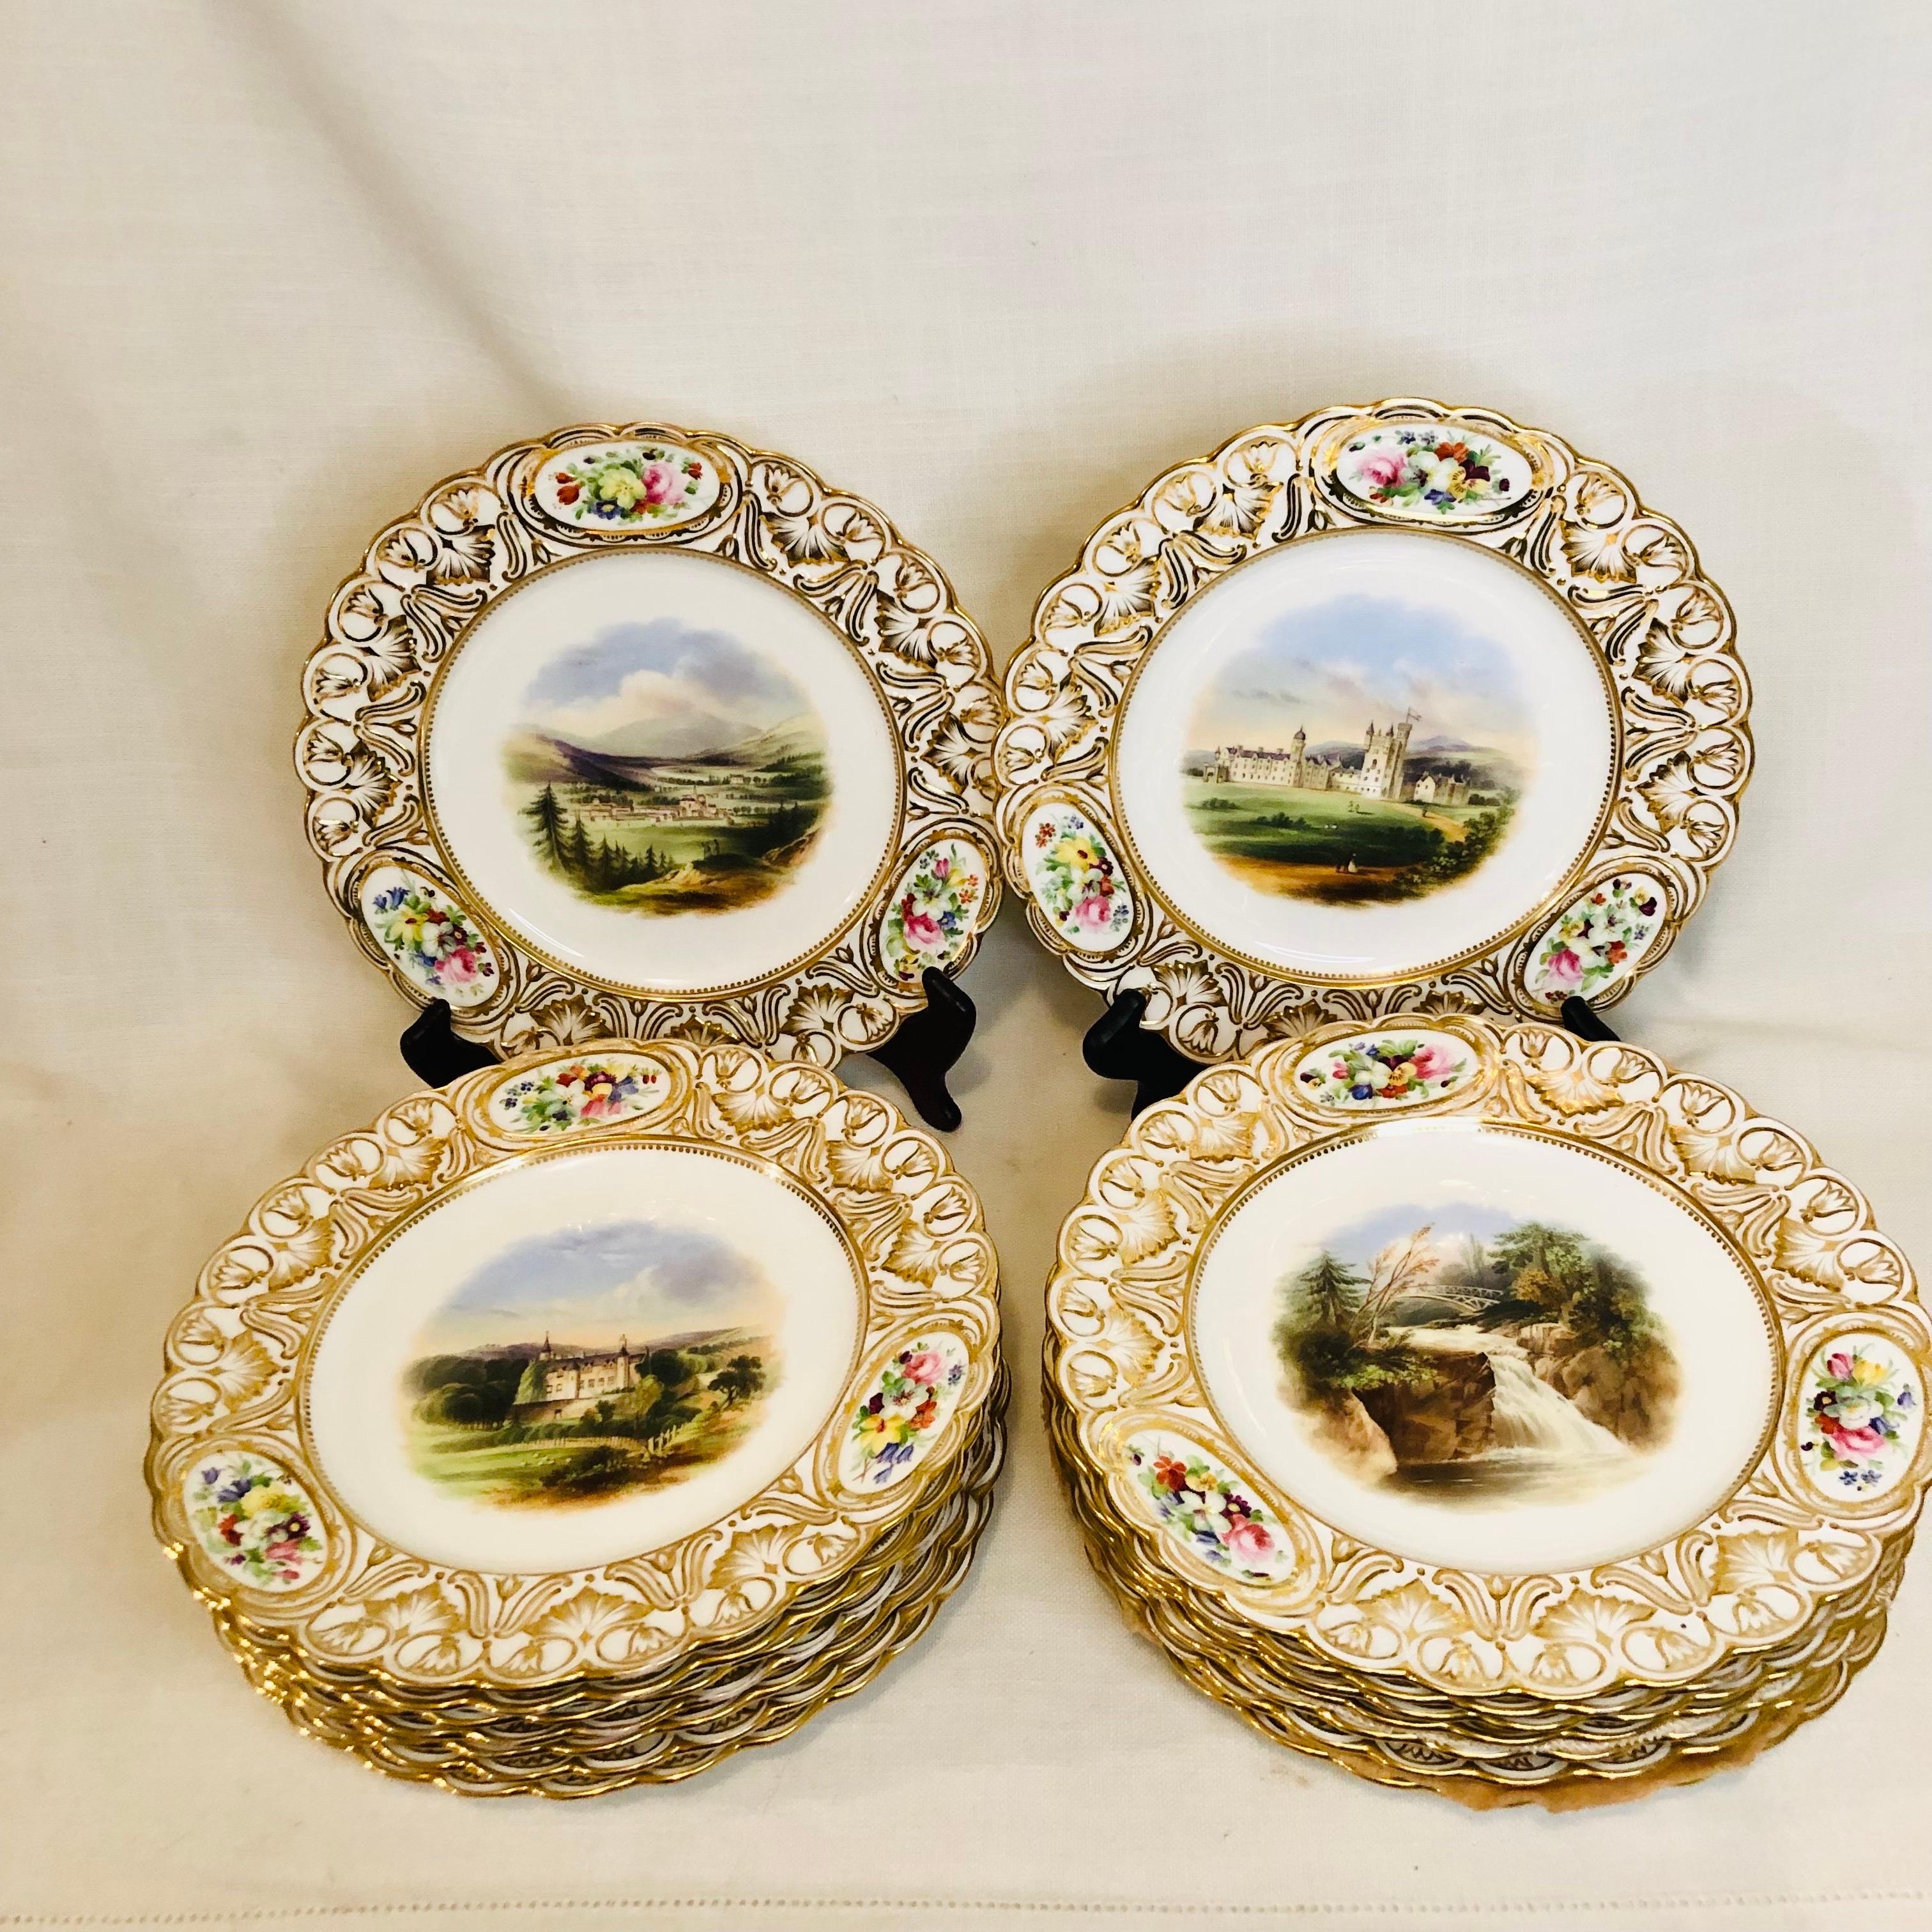 I want to offer you this rare exquisite set of sixteen Coalport plates Each plate is painted with beautiful scenery of different castles, churches, palaces, lochs, valleys and bridges, each with the title of the painting on the back of each plate.